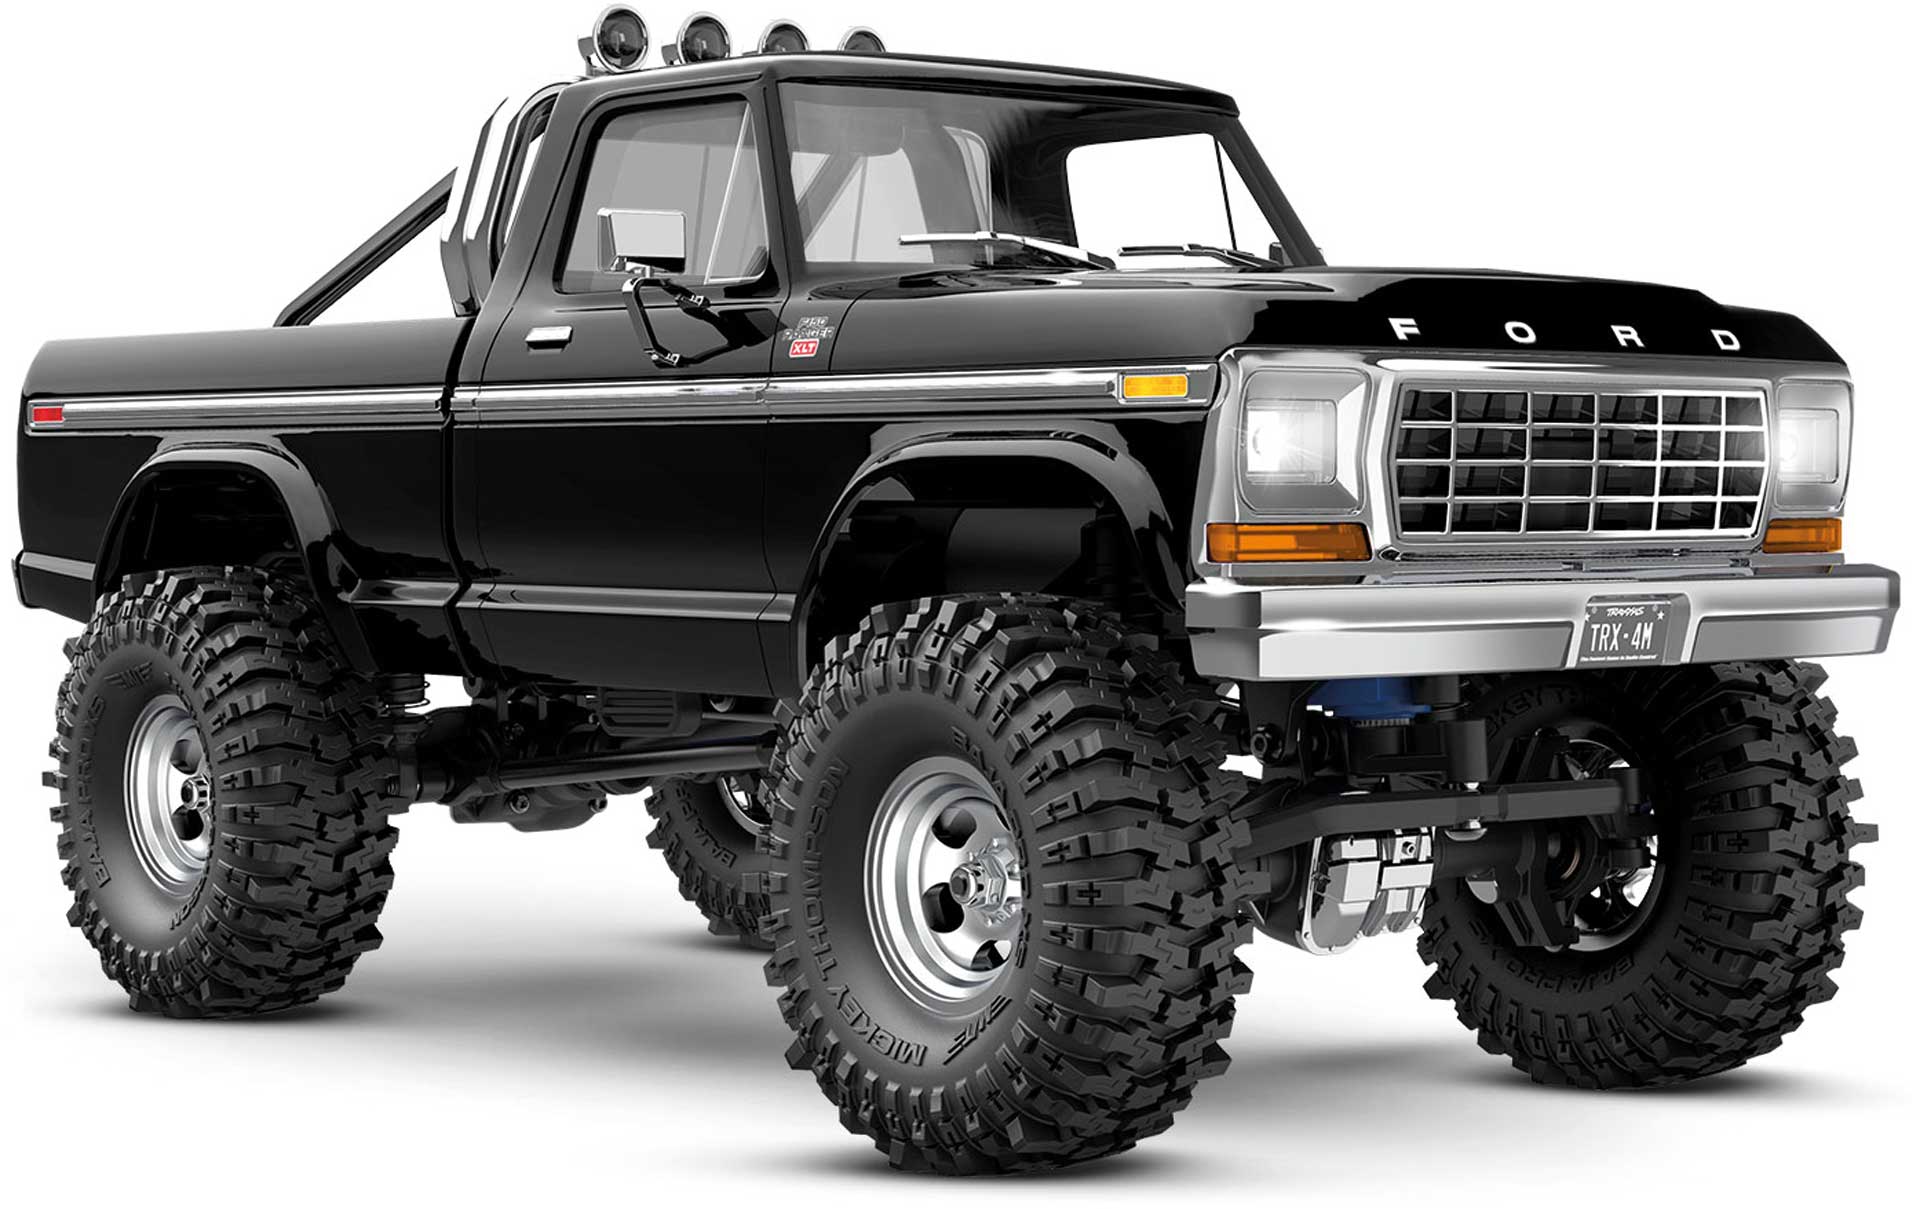 TRAXXAS TRX-4M FORD F150 4X4 LIFTED NOIR 1/18 CRAWLER RTR BRUSHED, AVEC ACCU ET CHARGEUR USB